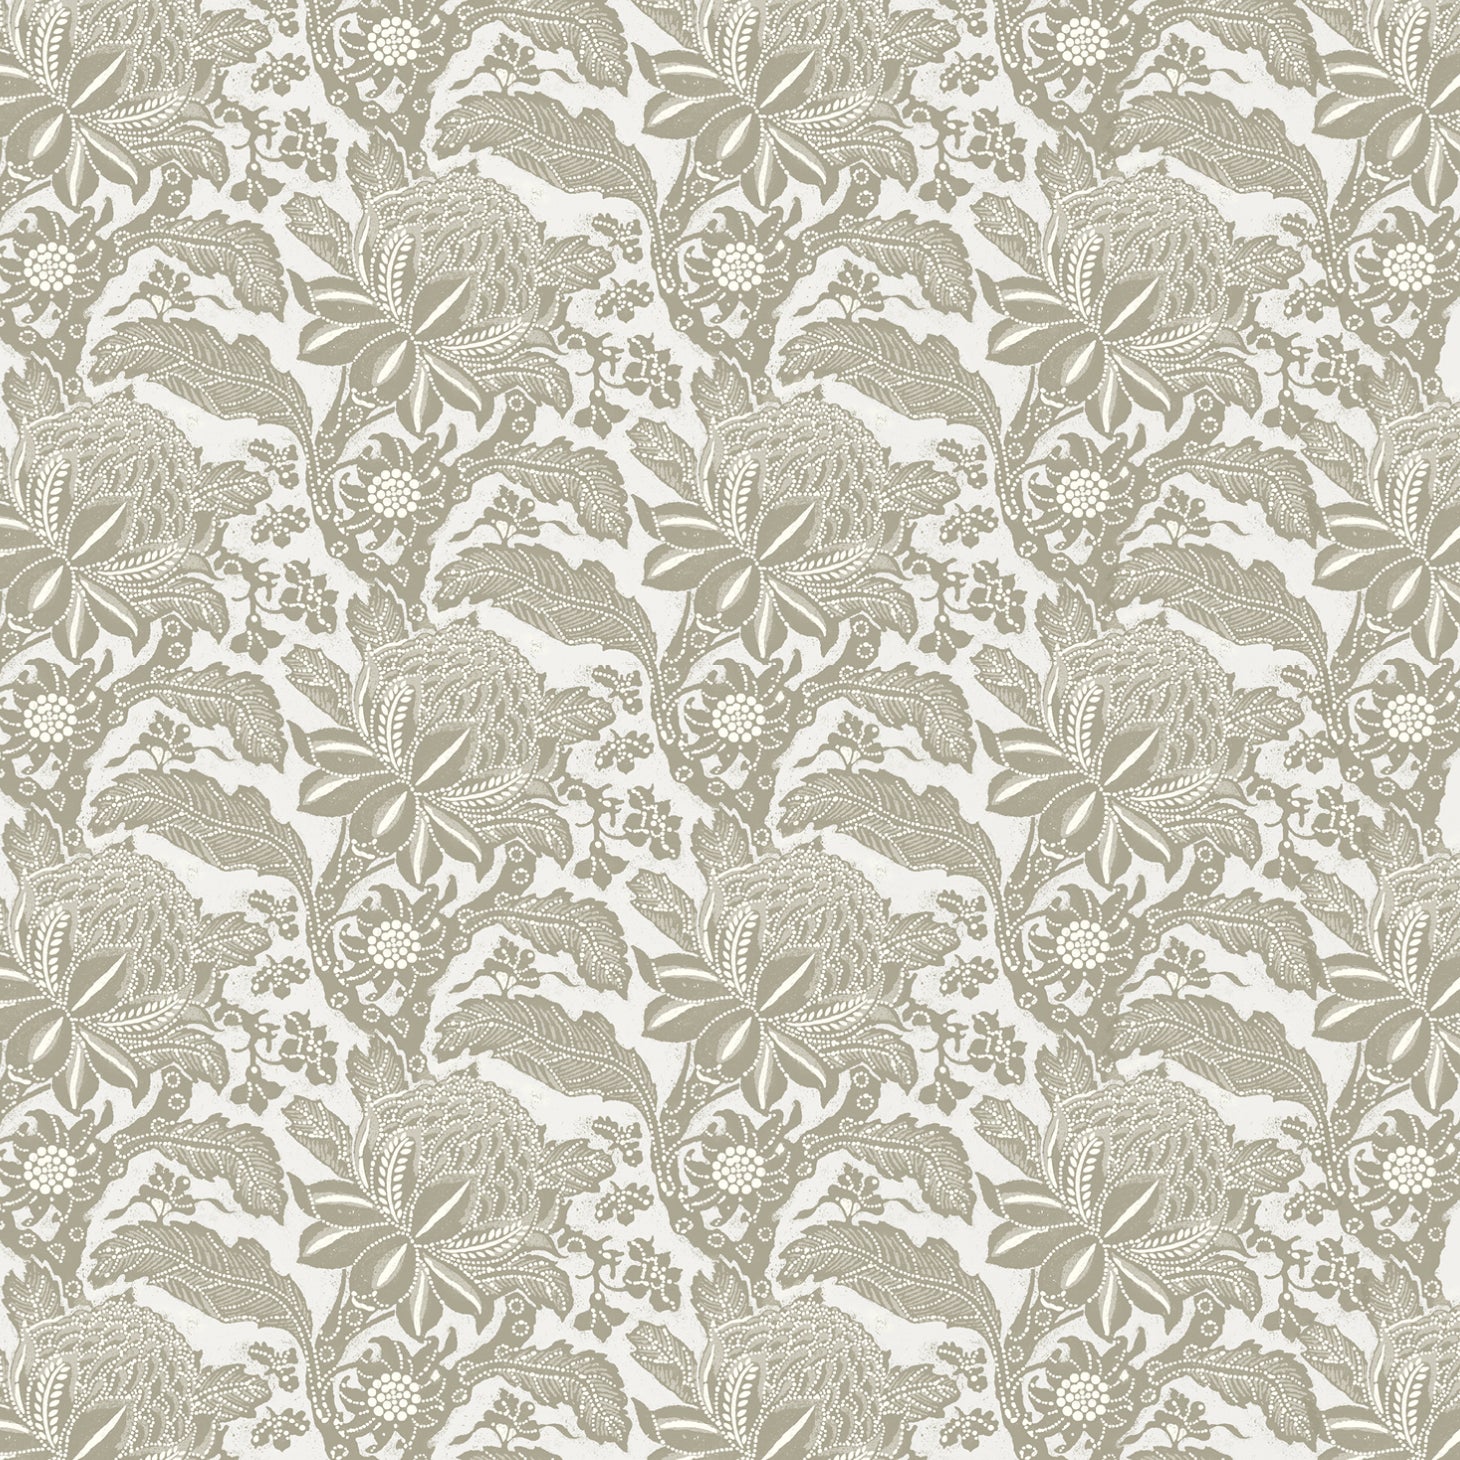 Detail of wallpaper in a repeating botanical print in cream on a white field.